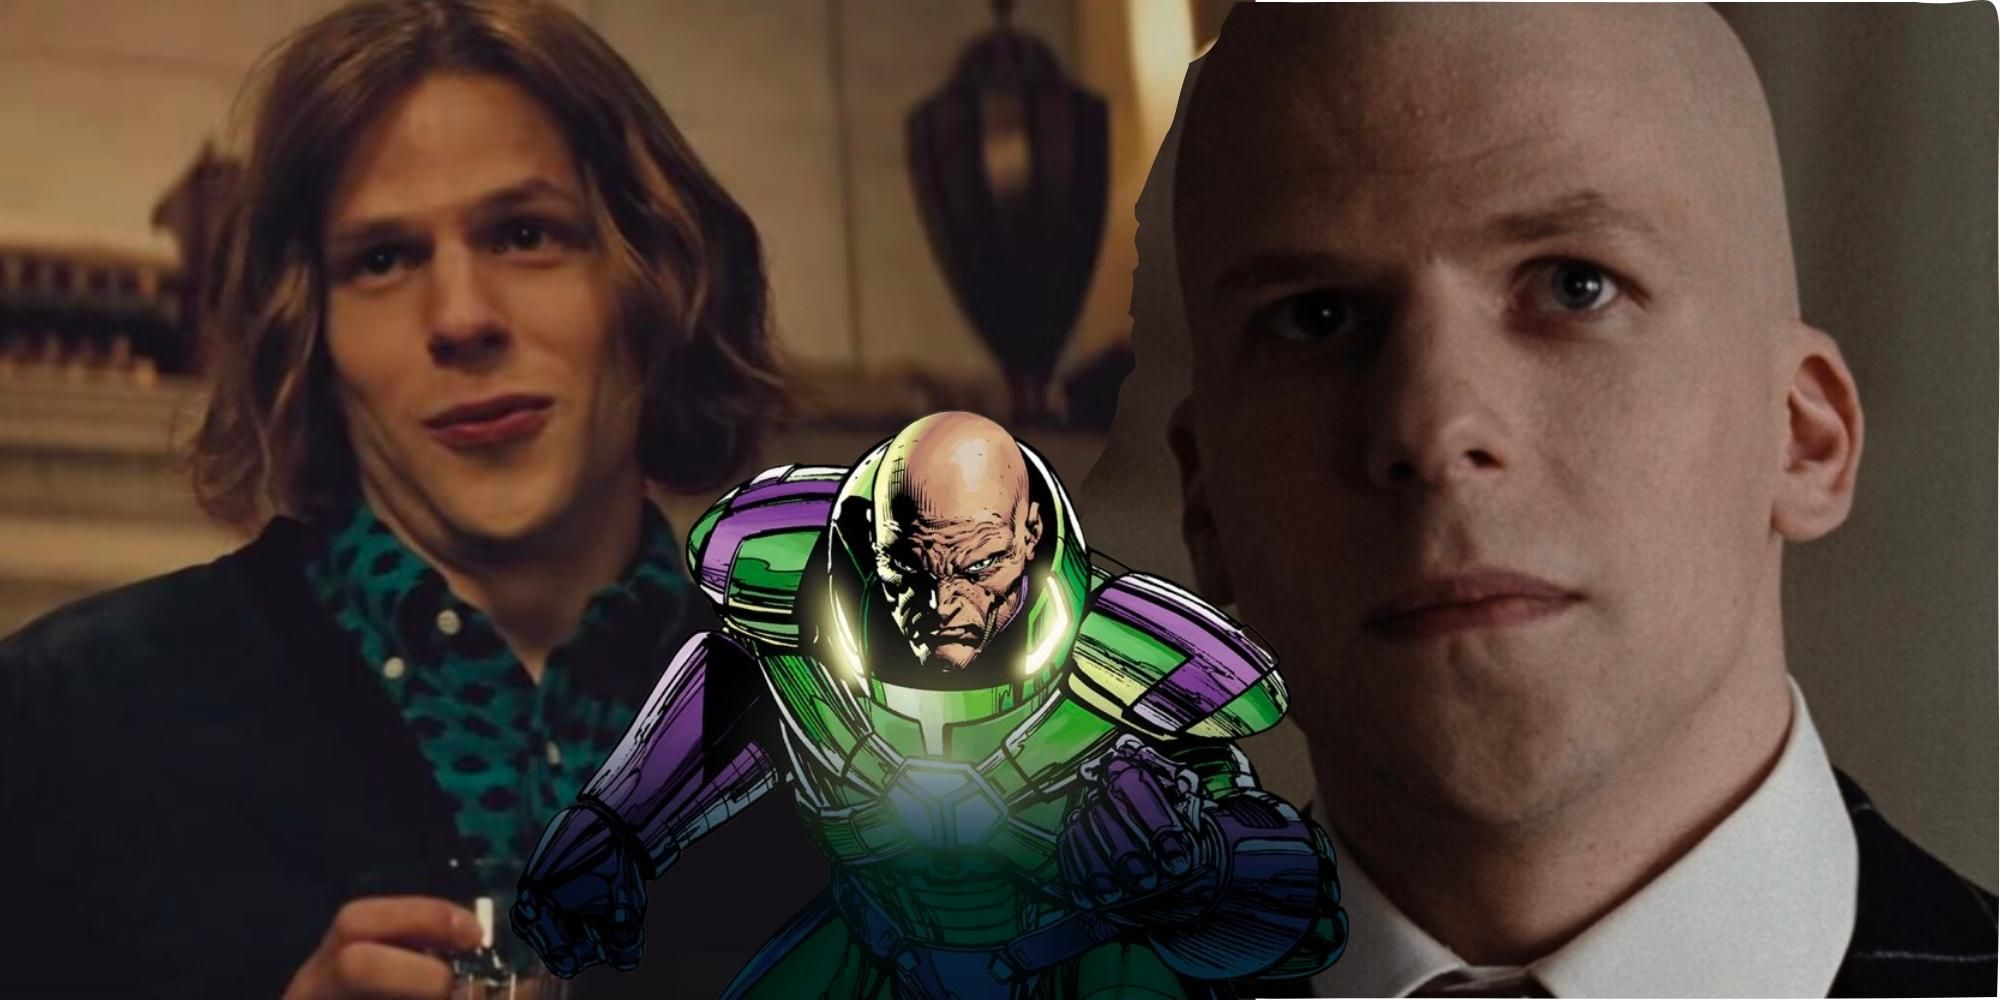 Batman v Superman Jesse Eisenberg as Lex Luthur with and without hair, behind the DCU character as he appears in the comic books